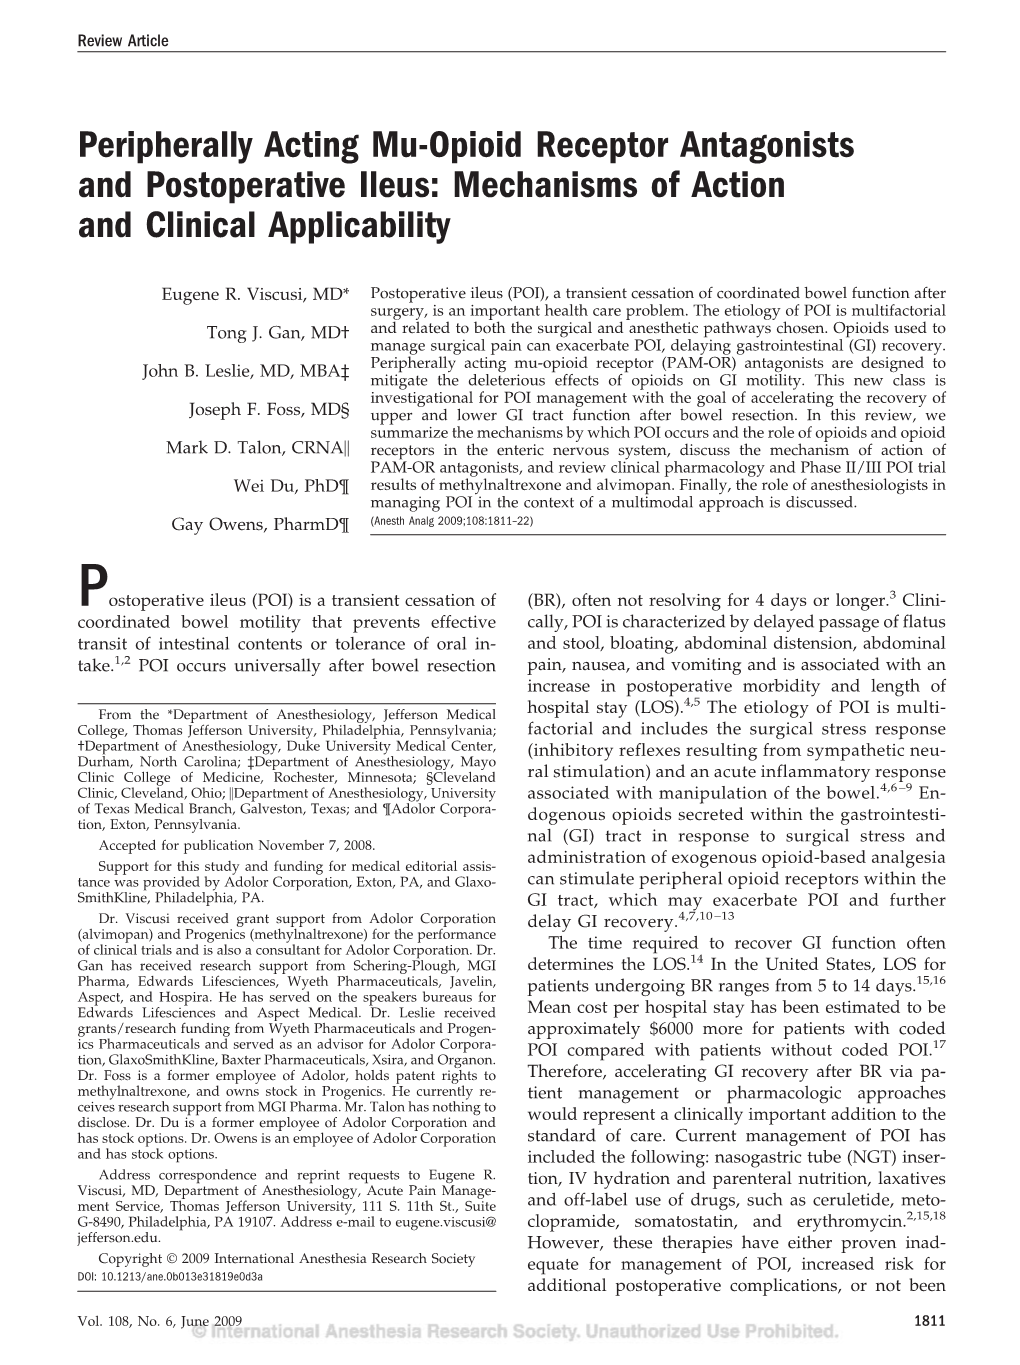 Peripherally Acting Mu-Opioid Receptor Antagonists and Postoperative Ileus: Mechanisms of Action and Clinical Applicability